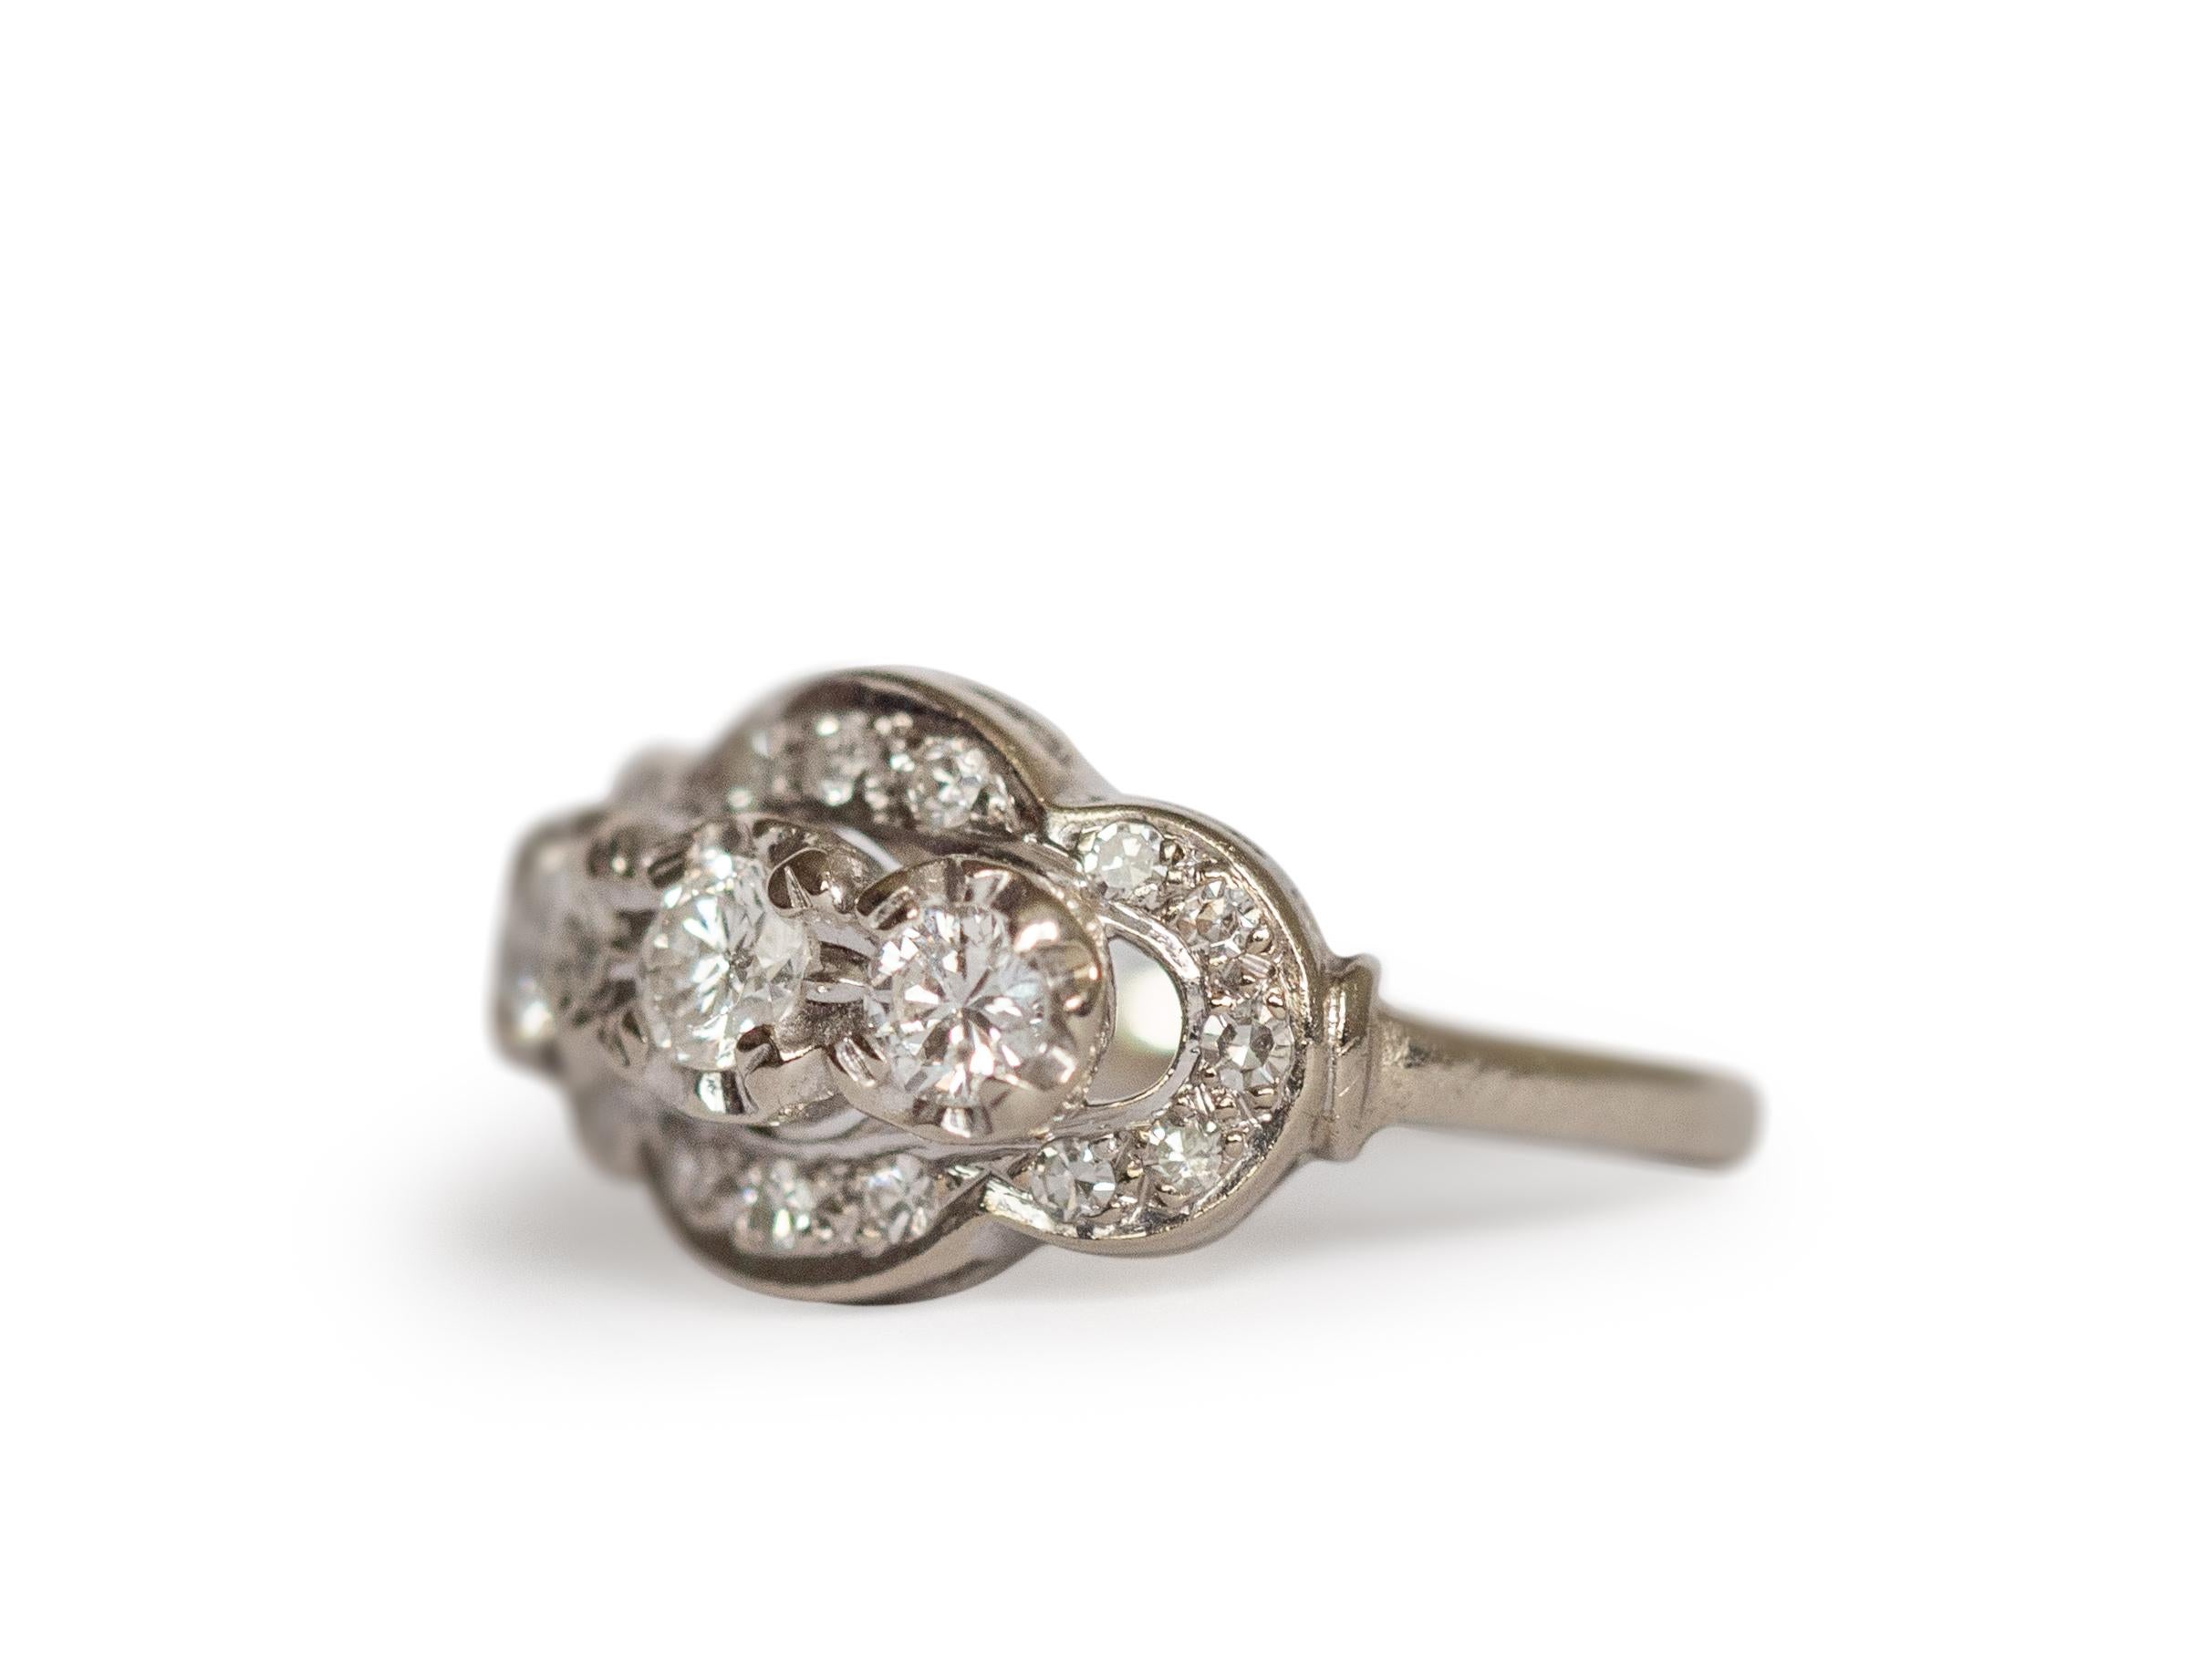 Ring Size: 6
Metal Type: Platinum  [Hallmarked, and Tested]
Weight:  3 grams

Diamond Details:
Weight: .50 carat total weight
Cut: Transitional Rounds
Color: G
Clarity: VS


Finger to Top of Stone Measurement: 6mm
Condition:  Excellent